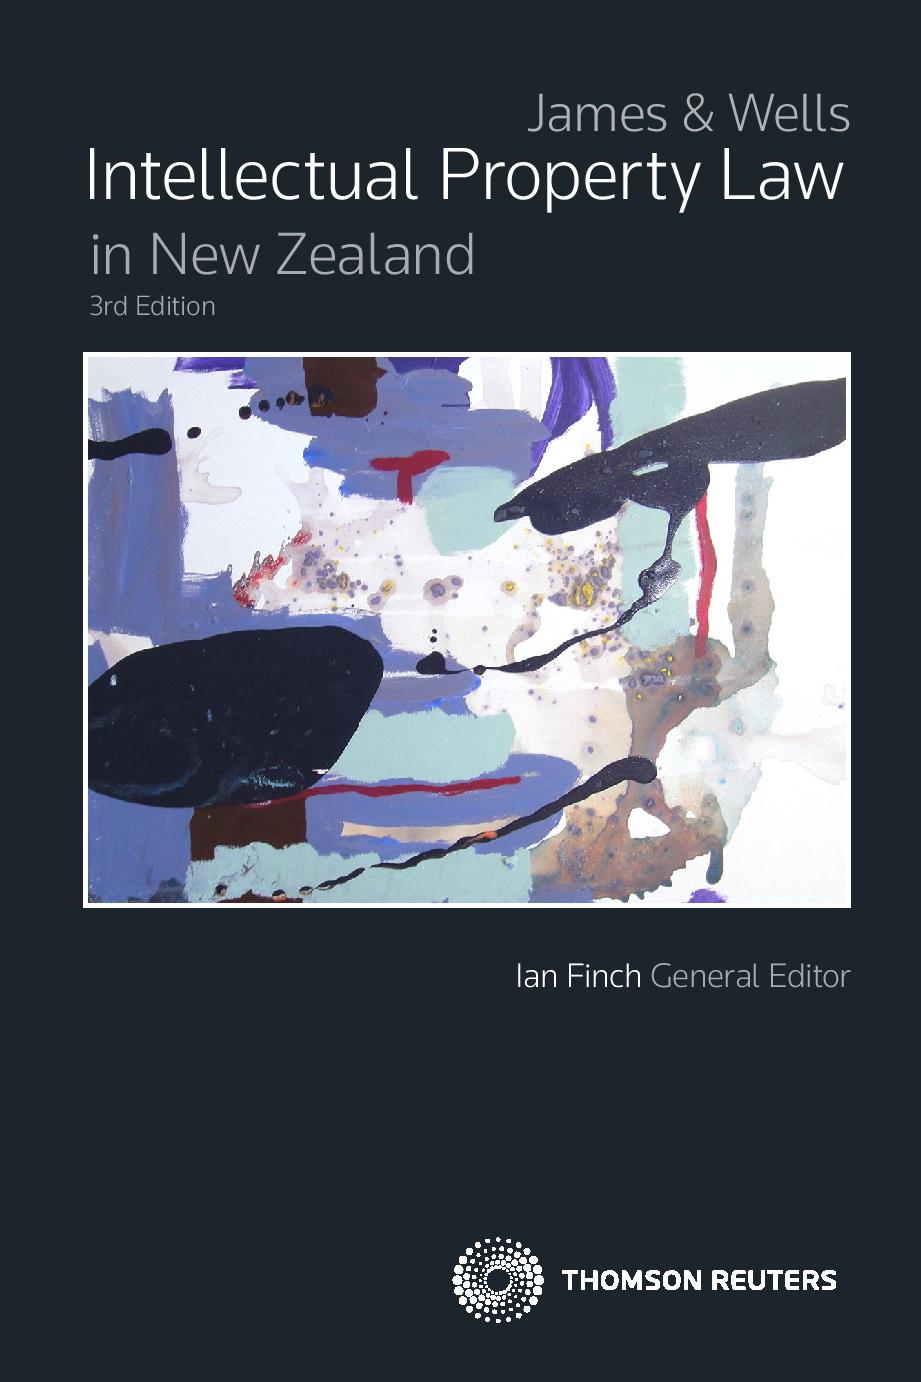 James & Wells Intellectual Property Law in New Zealand - 3rd Edition (eBook)